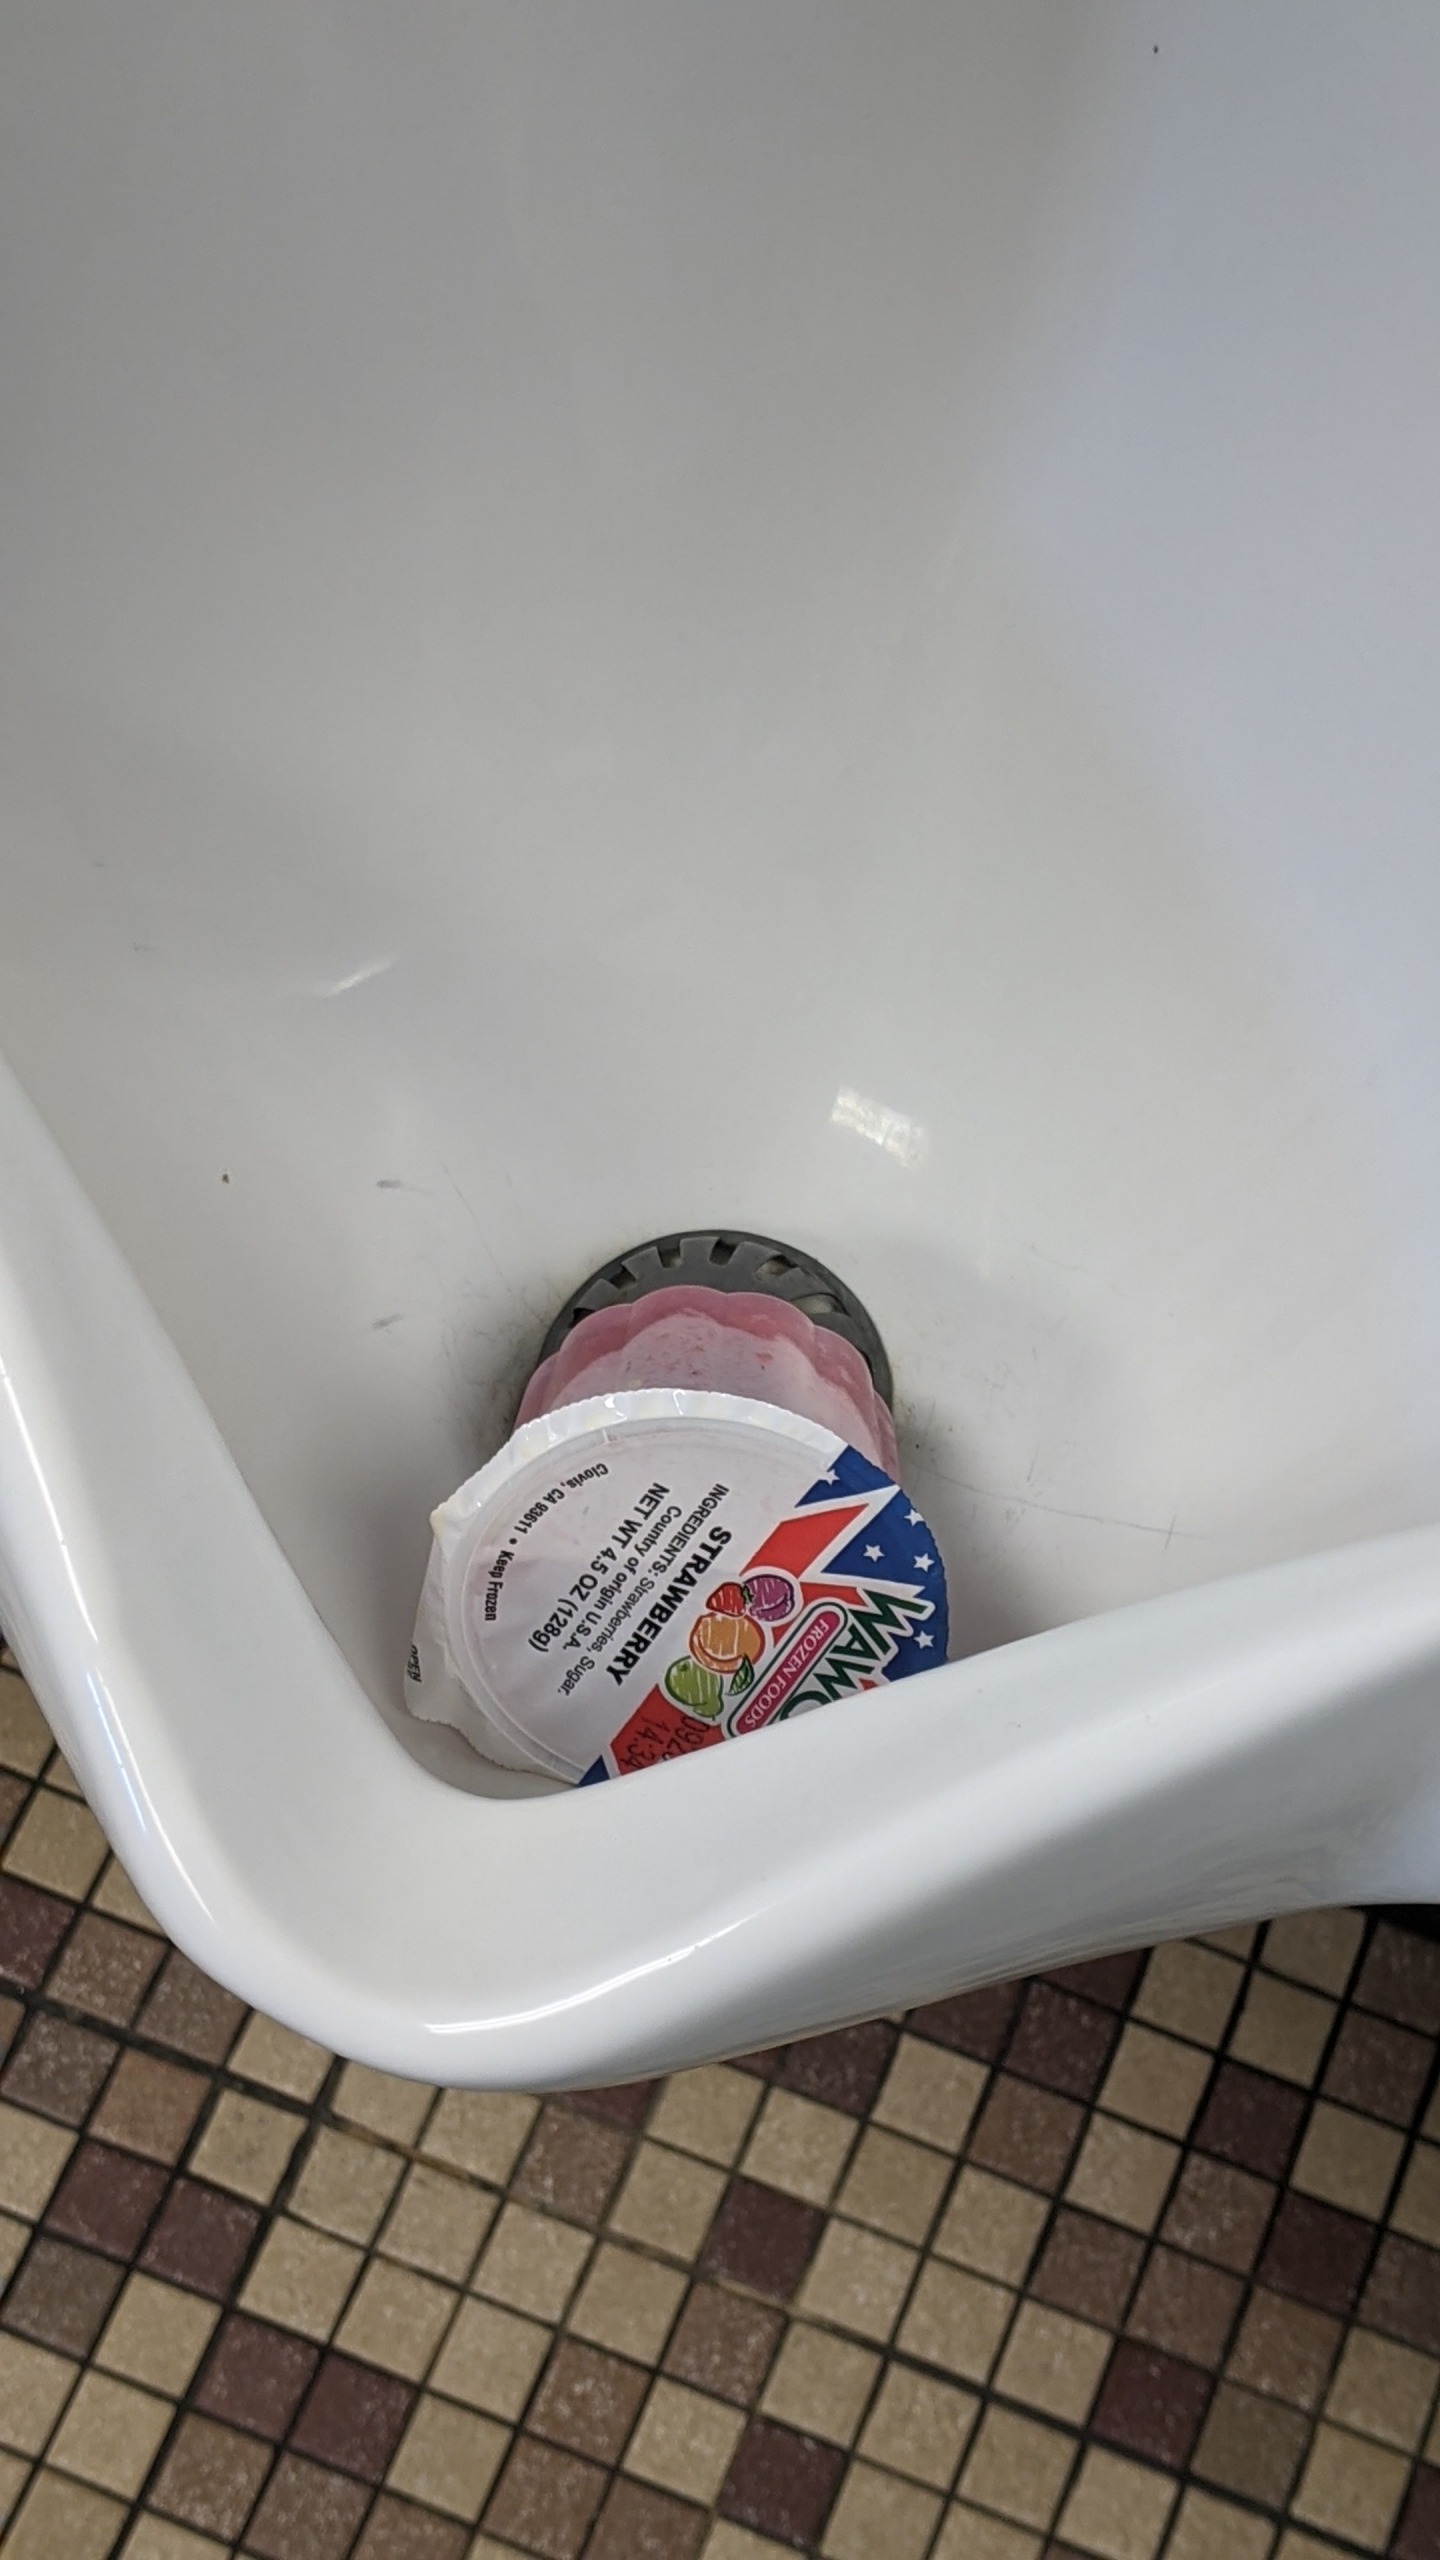 food-in-middle-school-urinal-blank-template-imgflip